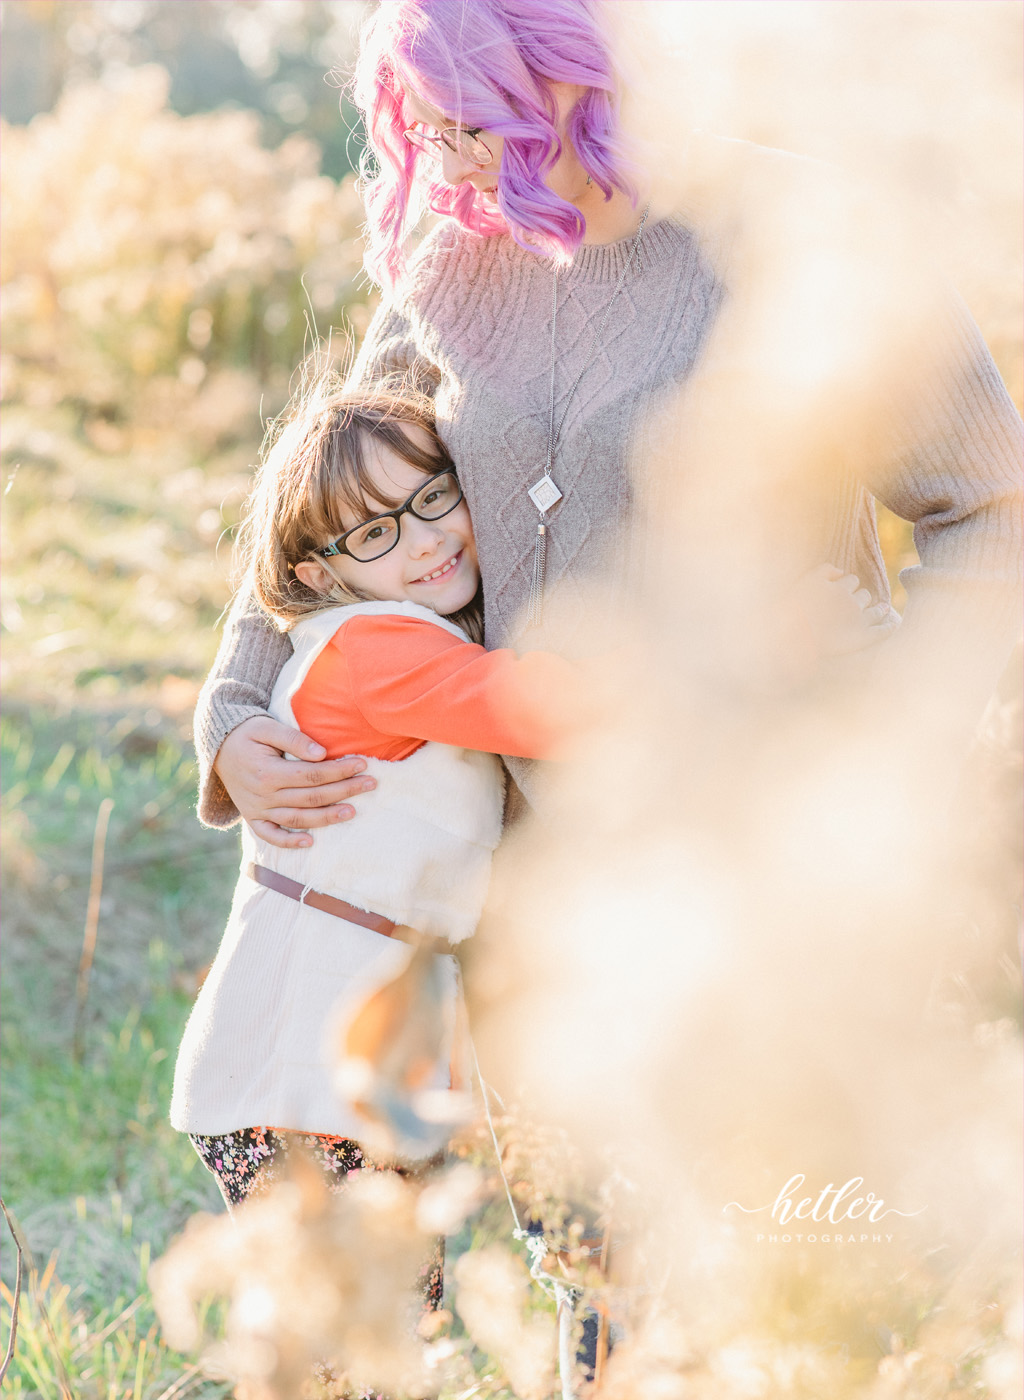 Grand Rapids family photos at The Highlands during golden hour